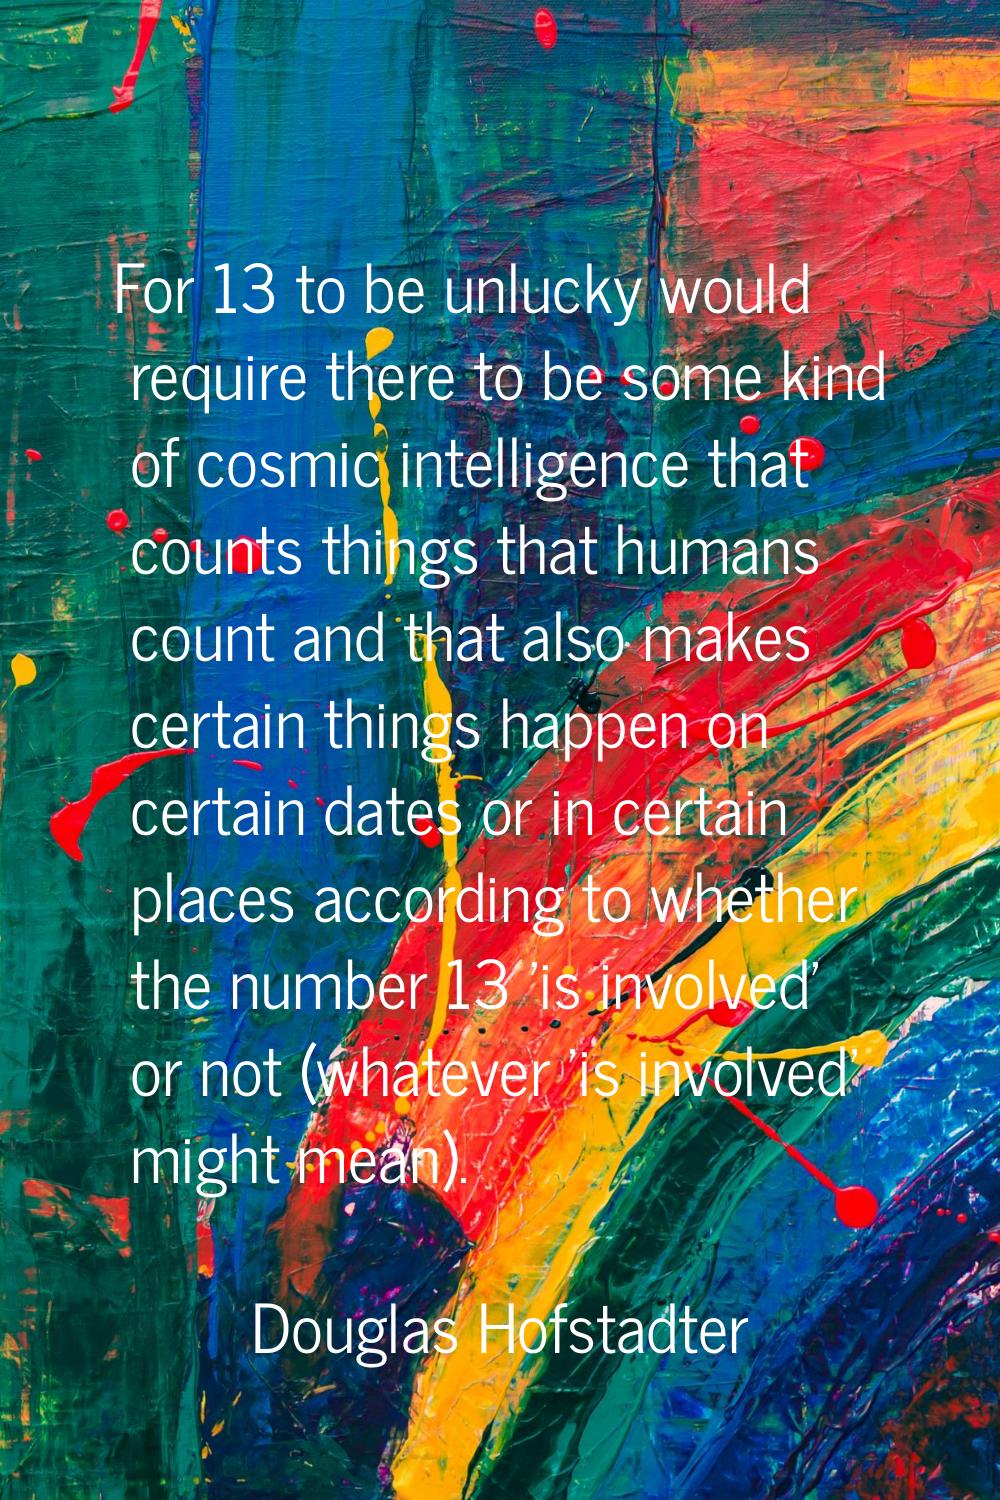 For 13 to be unlucky would require there to be some kind of cosmic intelligence that counts things 